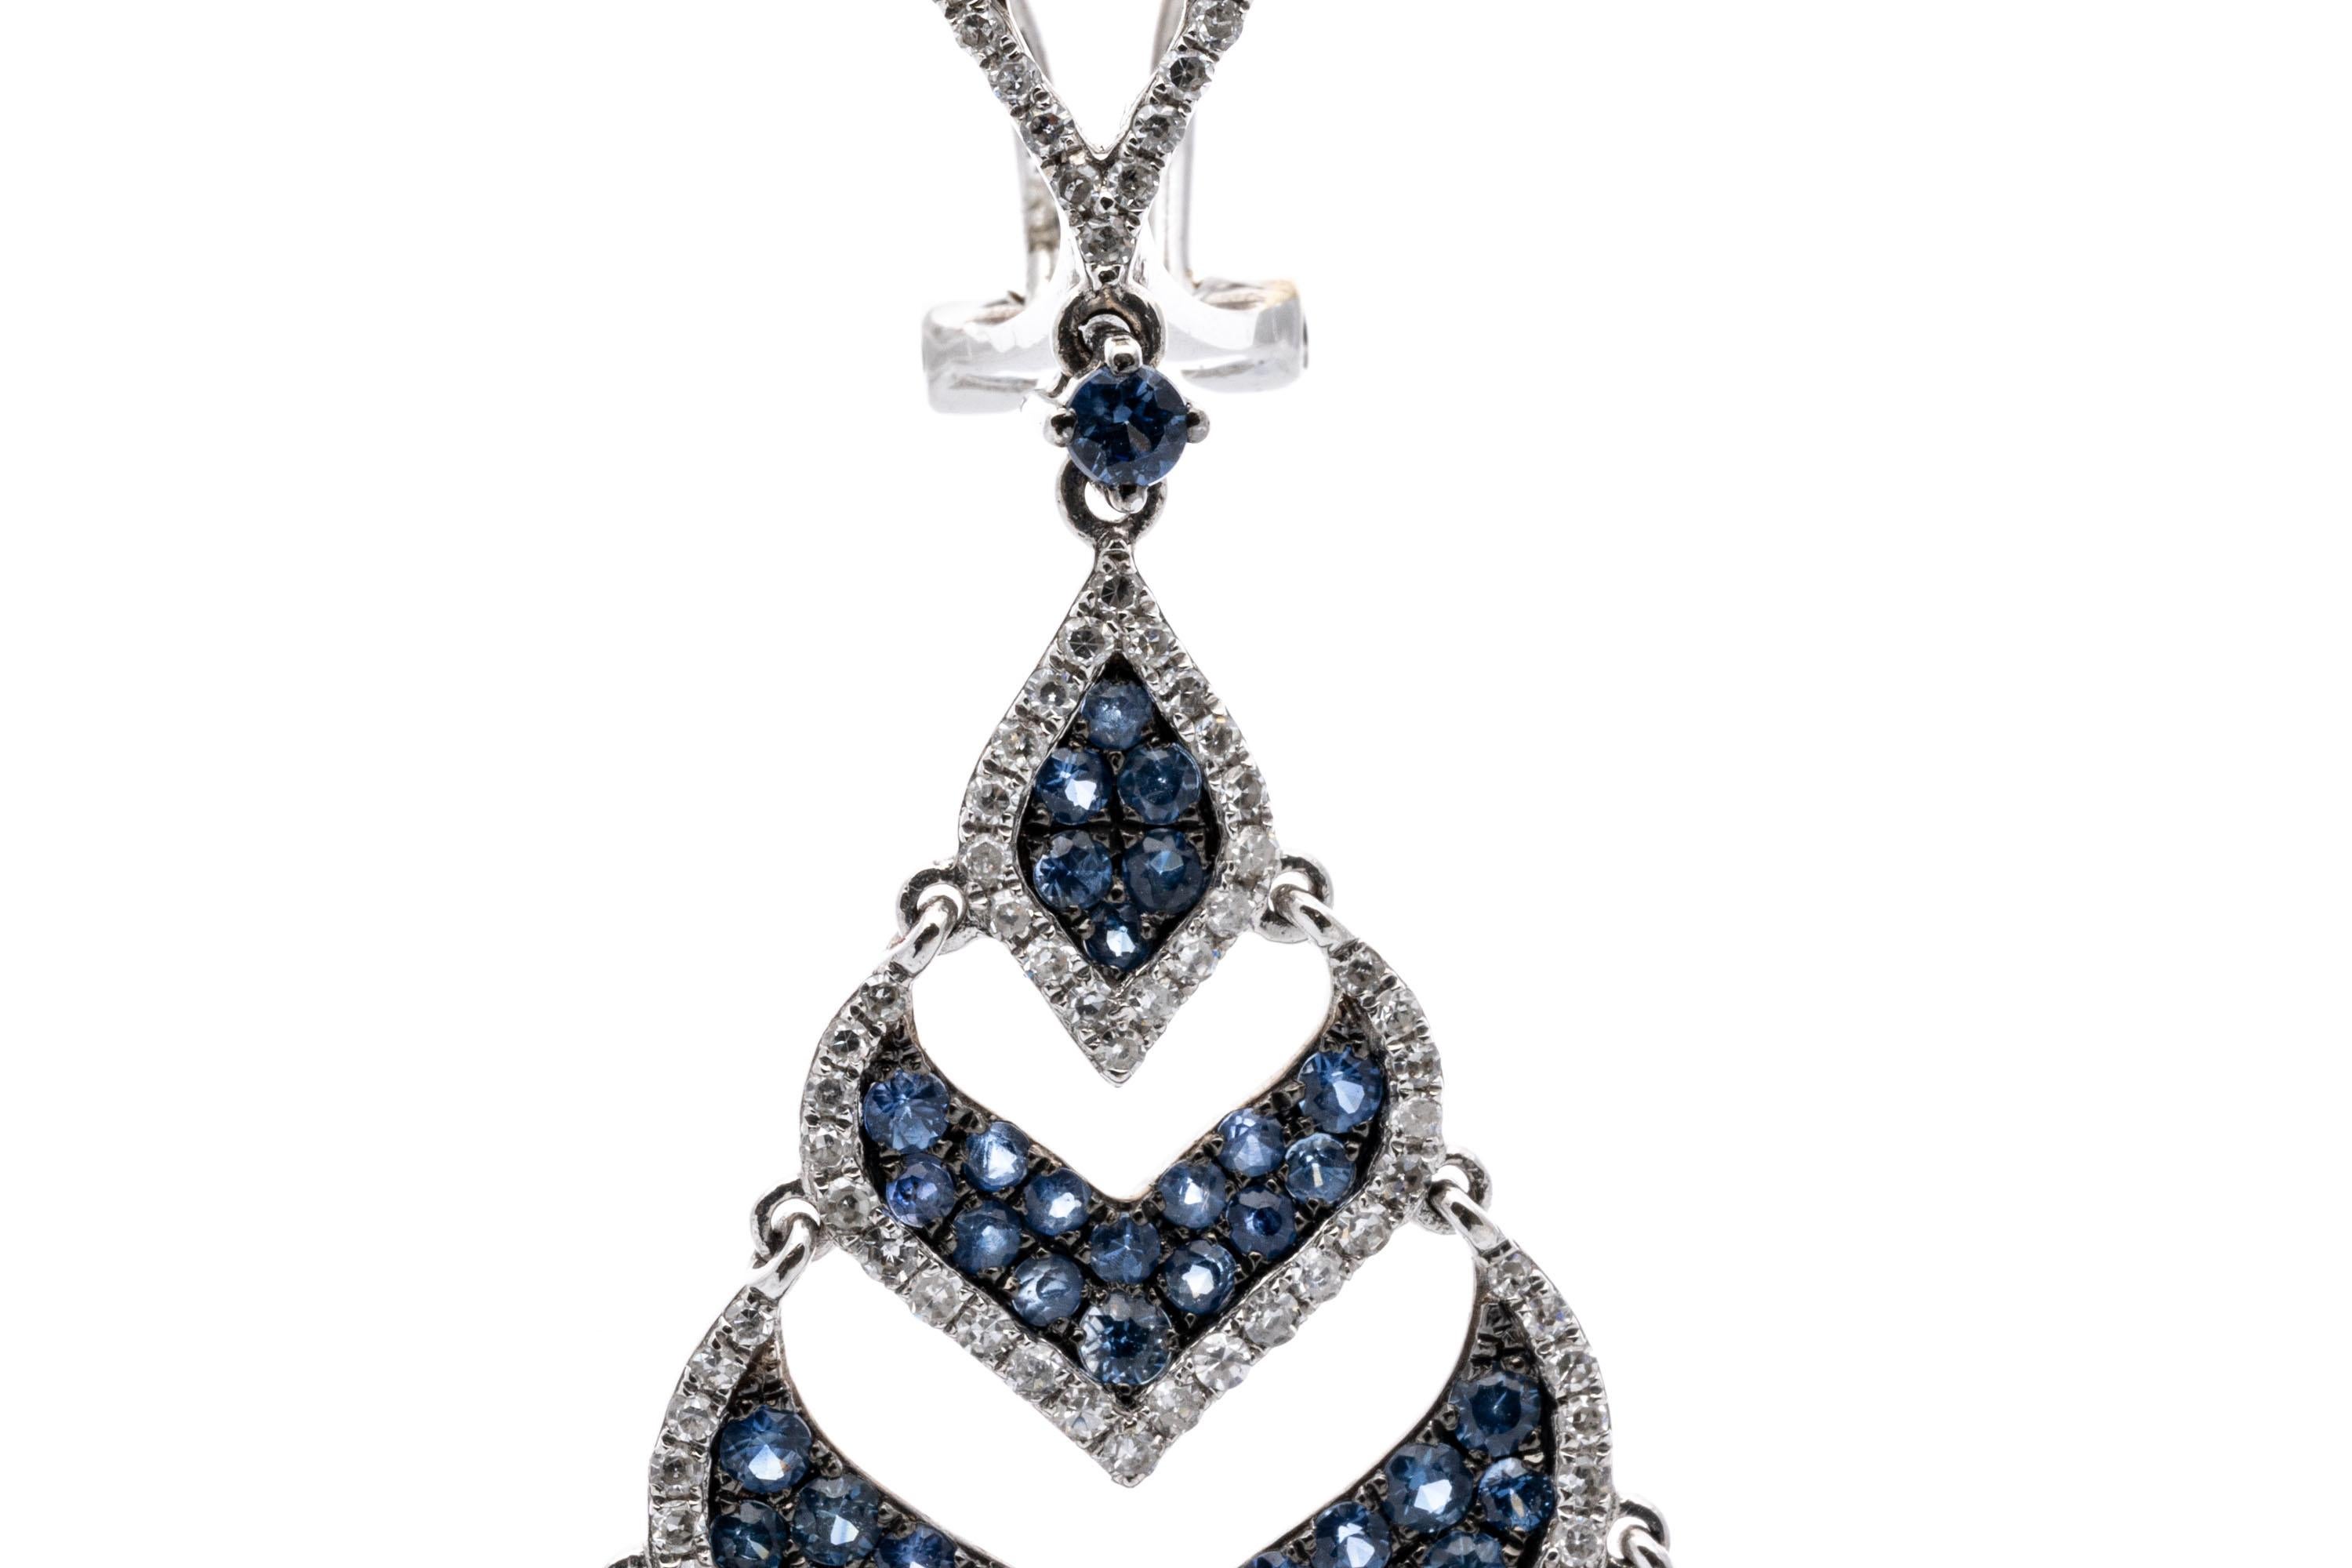 18k Gorgeous Blue Sapphire (3.98 TCW) And Diamond (1.24 TCW)  Pendant Earrings. These graceful, gorgeous earrings contain four nesting, graduated, chevron shaped drop swirls, all set with pave set round faceted light blue sapphires, trimmed with an